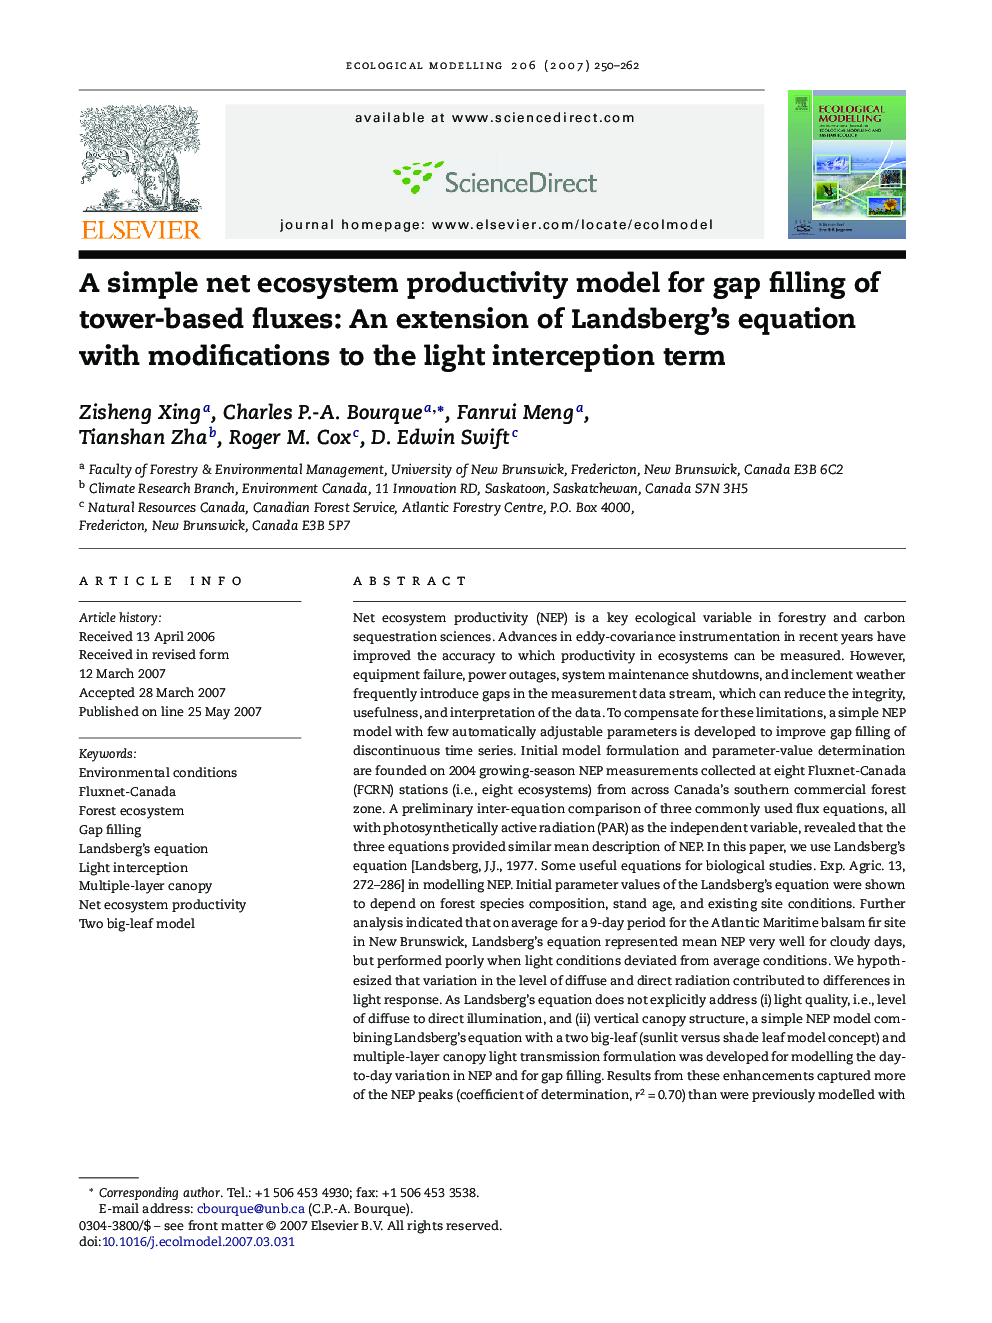 A simple net ecosystem productivity model for gap filling of tower-based fluxes: An extension of Landsberg's equation with modifications to the light interception term